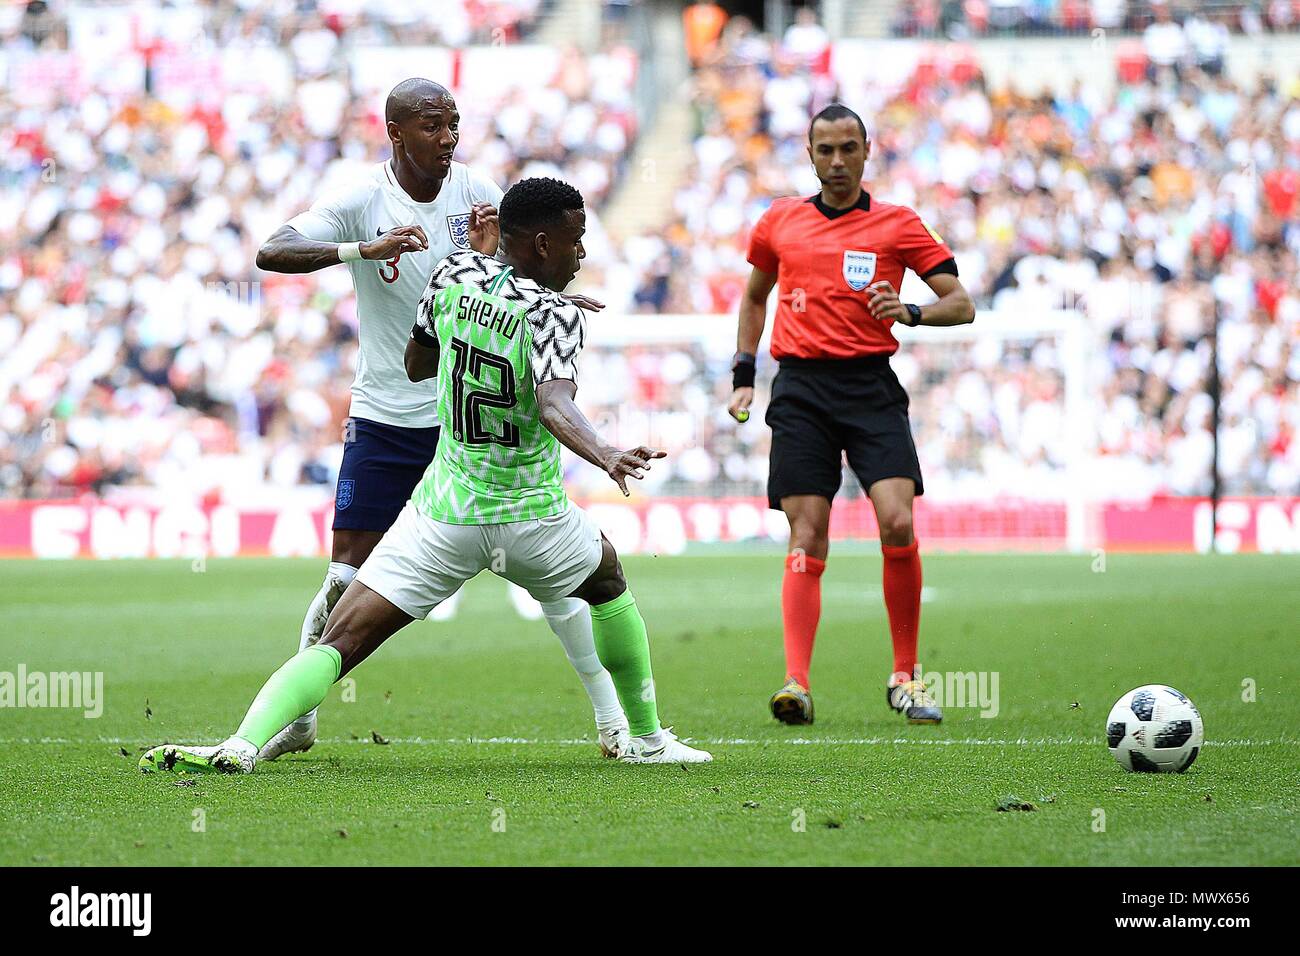 London, UK. 2nd June 2018. London, UK. 2nd June 2018. Ashley Young of England takes on Shehu Abdullahi of Nigeria during the International Friendly match between England and Nigeria at Wembley Stadium on June 2nd 2018 in London, England. (Photo by Matt Bradshaw/phcimages.com) Credit: PHC Images/Alamy Live News Stock Photo